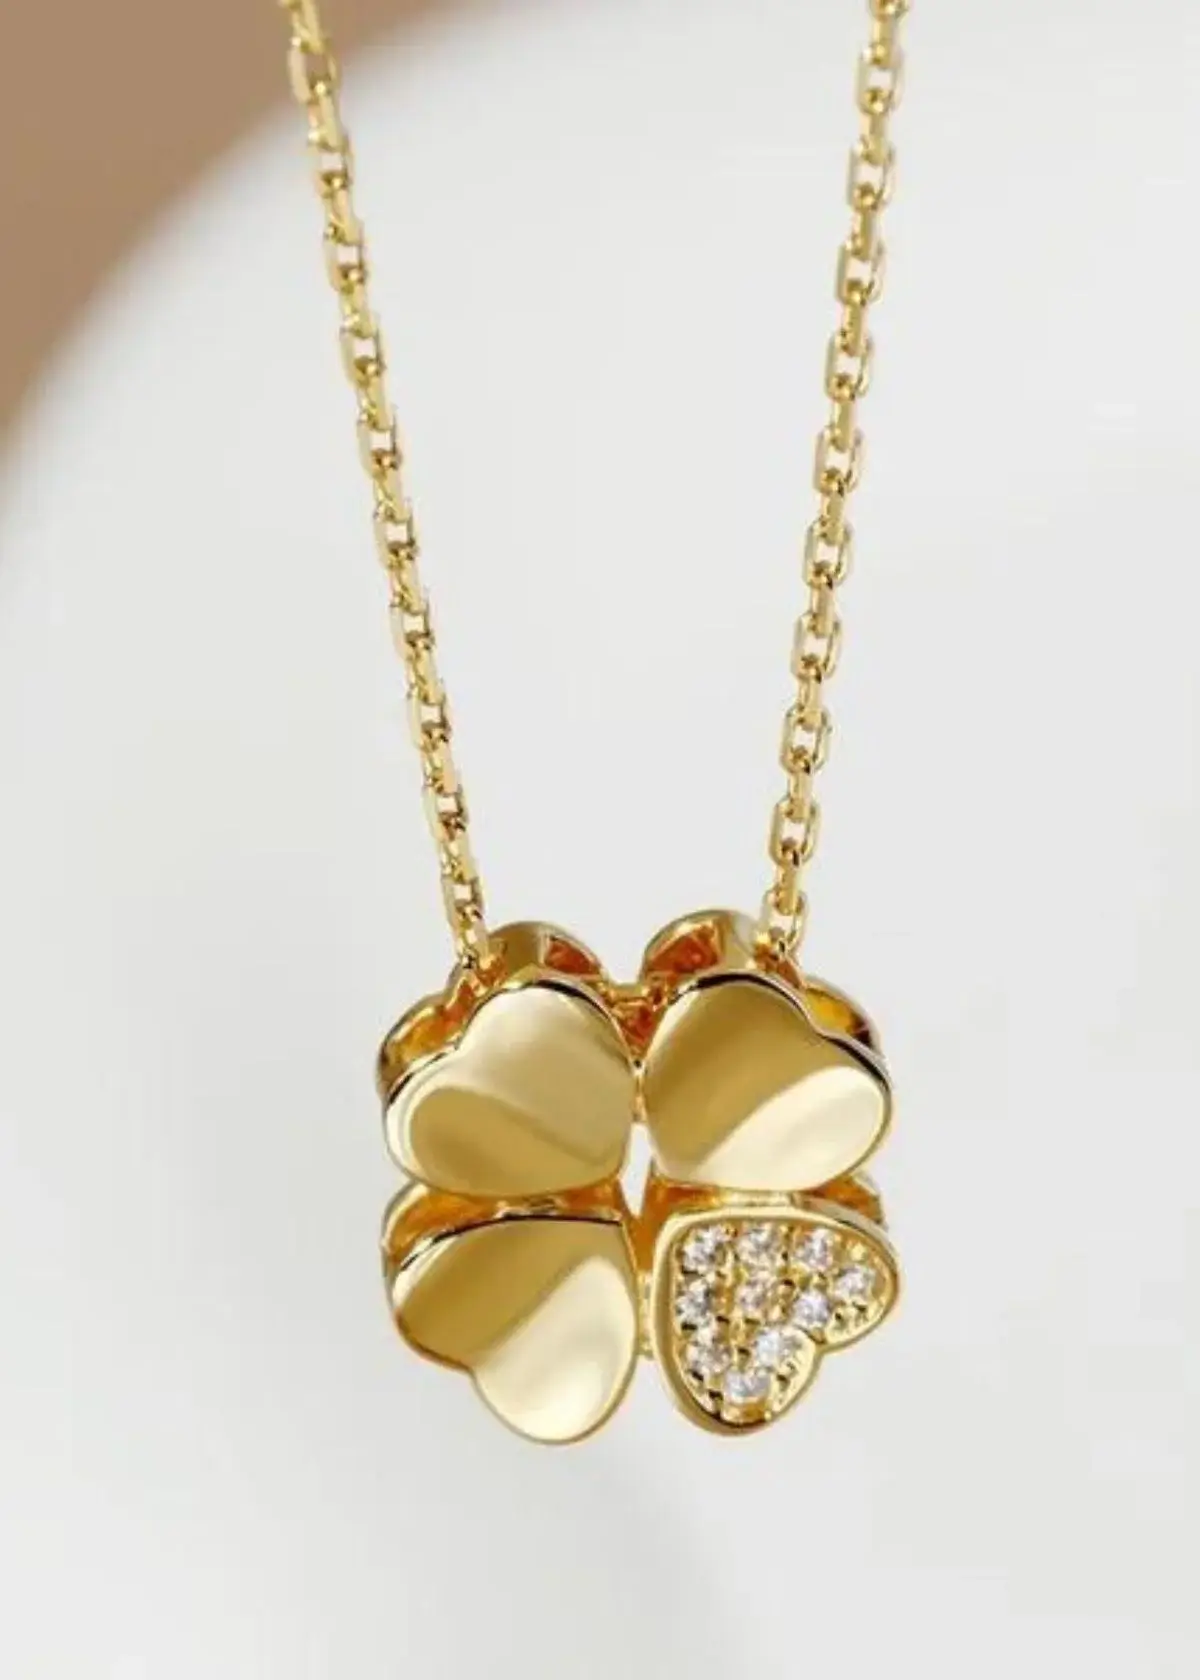 Are clover necklaces only available in silver or gold?